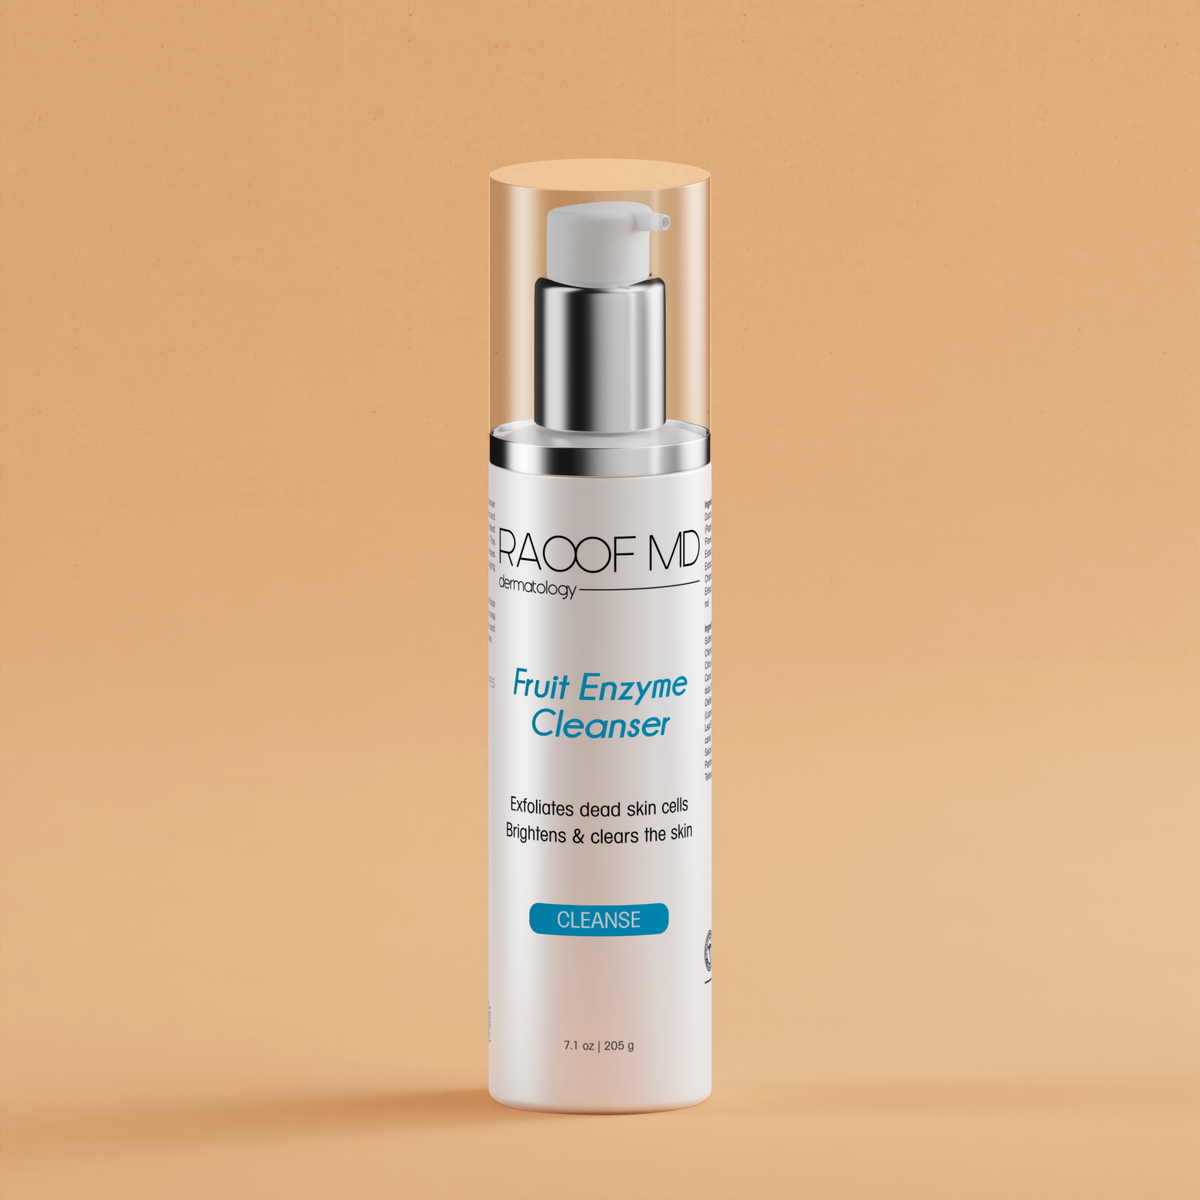 Fruit Enzyme Cleanser by RAOOF MD dermatology